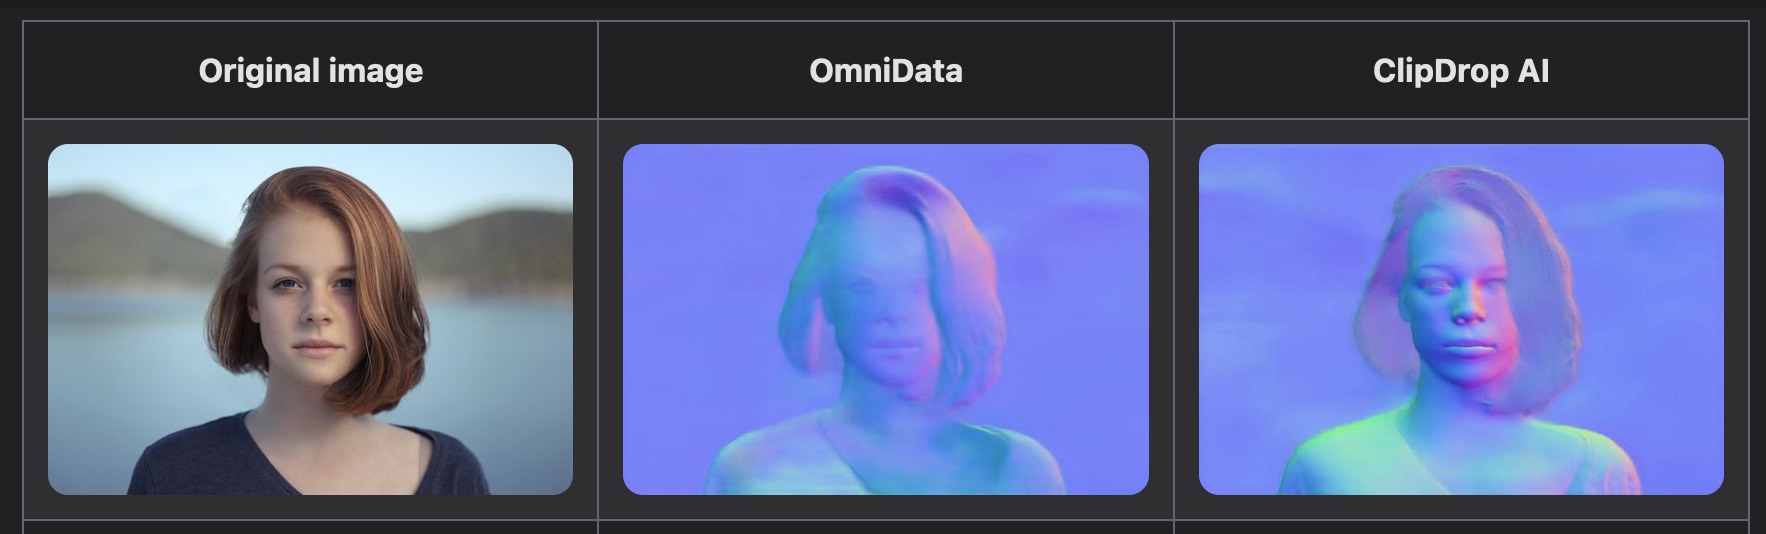 Demo of how the ClipDrop software compares to OmniData: ClipDrop's depth map is much more accurate